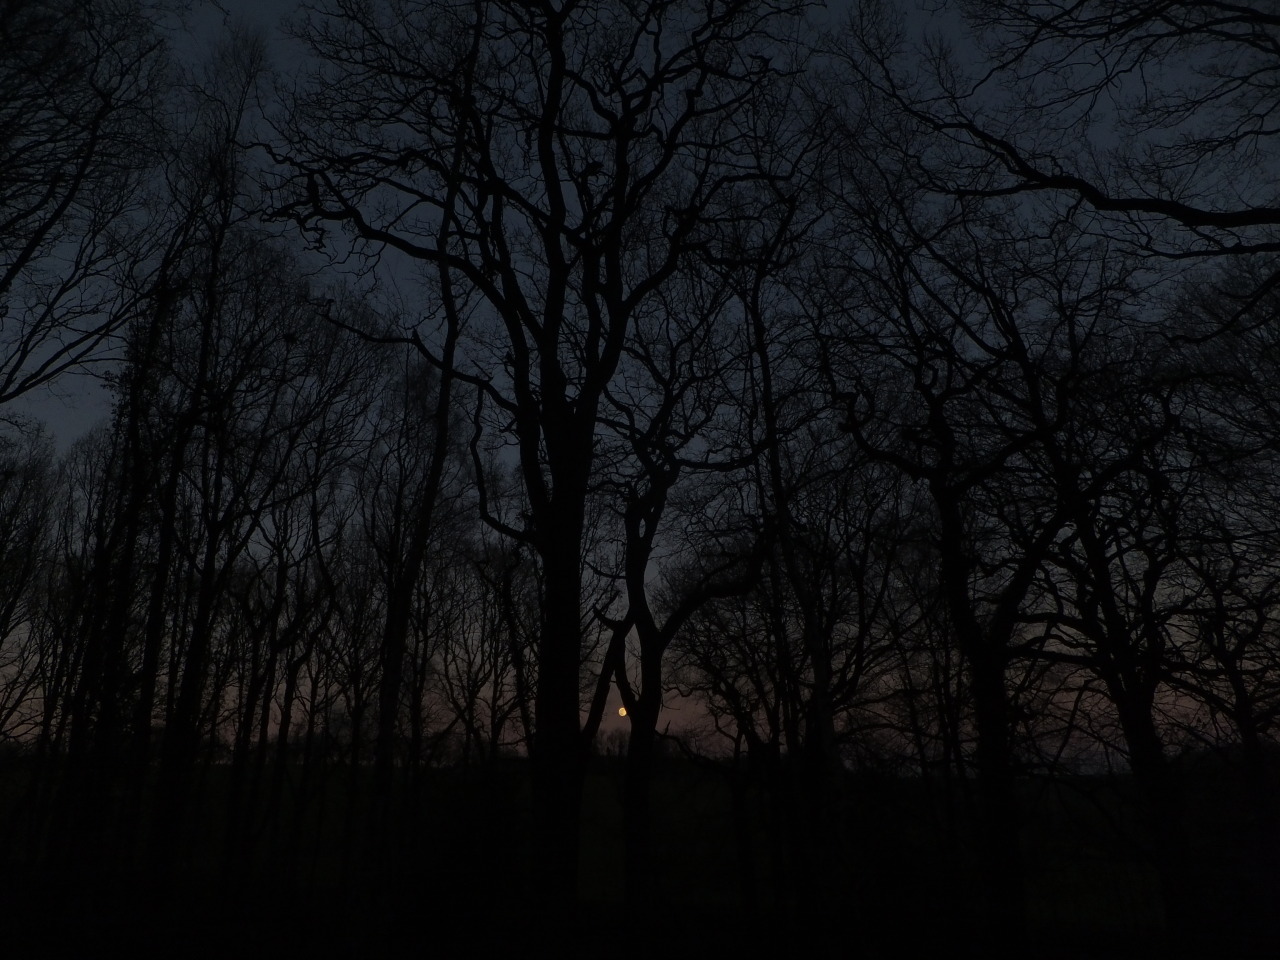 Wolf Moon Rising [Jan ‘22] #own photo#woods#forest#night#dark nature#moon#la luna#gothic#darkness#woodland#peace#serenity#moonrise#lensblr#dark#winter#night sky #was away from social media when I took these  #seems ages ago already  #how barren the trees are